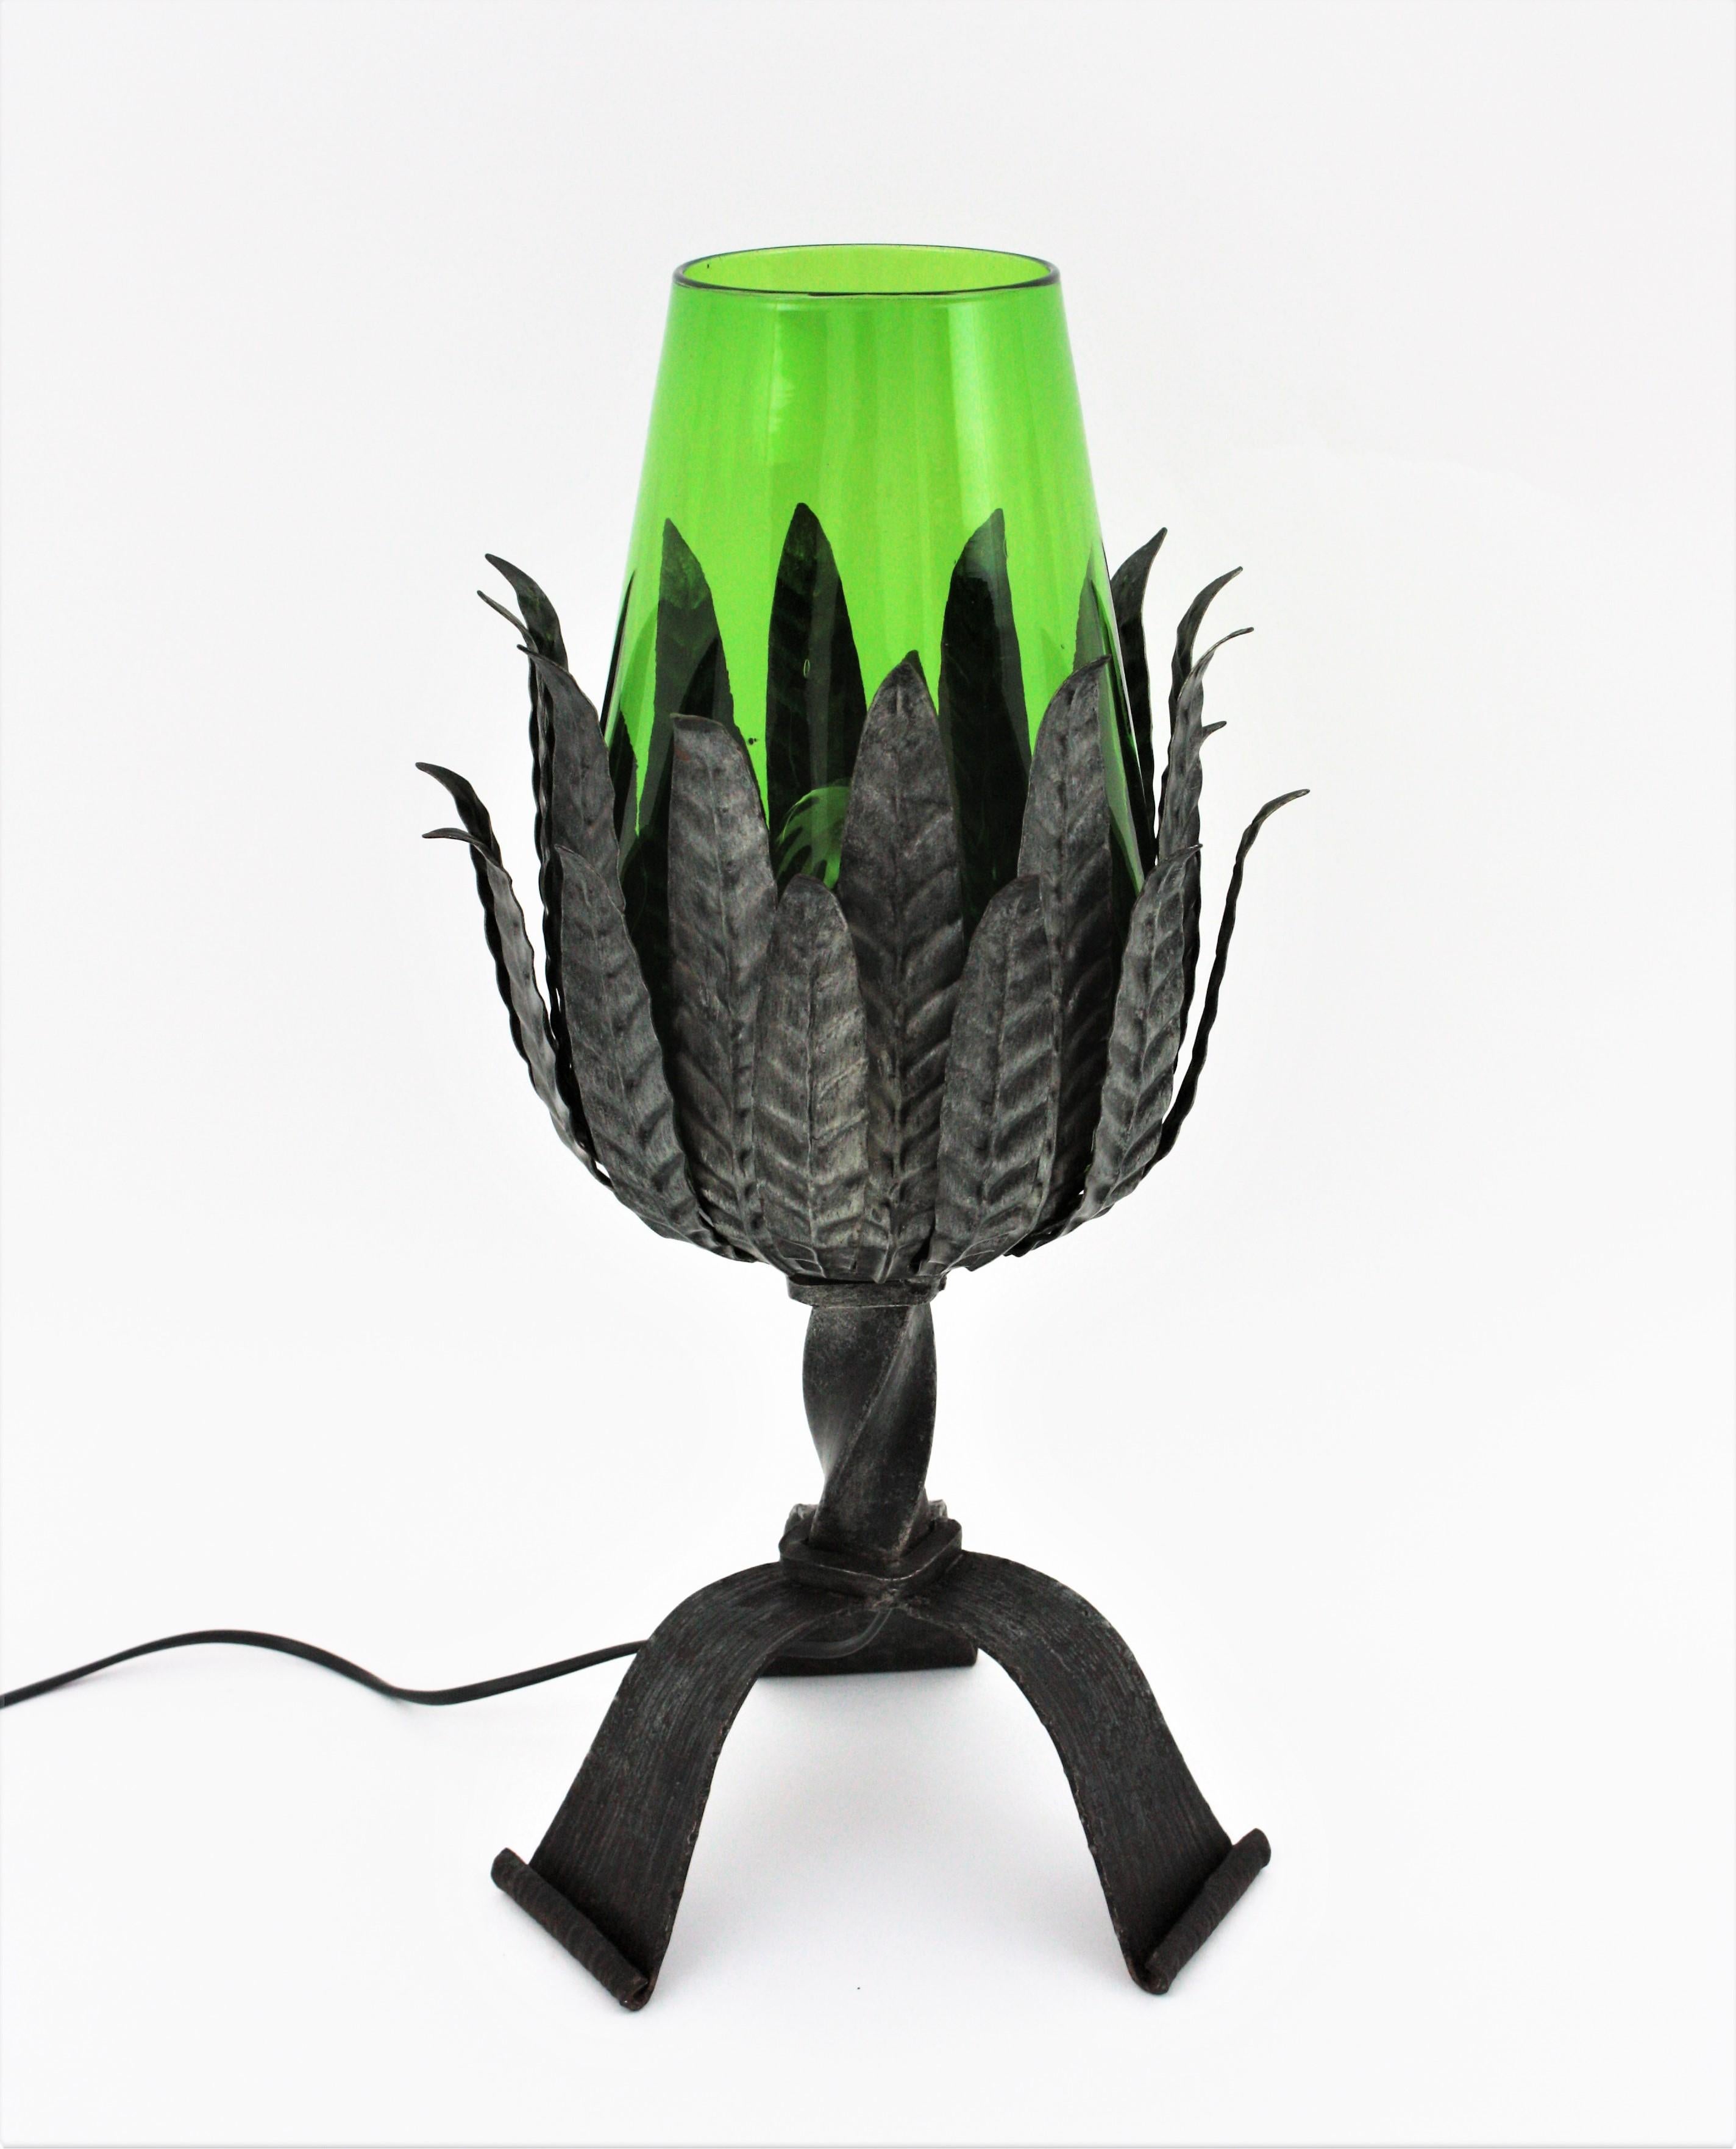 Silver patinated leafed iron table lamp with green glass lamphade. Spain, 1950s.
This gorgeous table lamp is entirely made by hand. This lamp features a bouquet of iron leaves holding a green blown glass lamphade. The base has a heavy construction